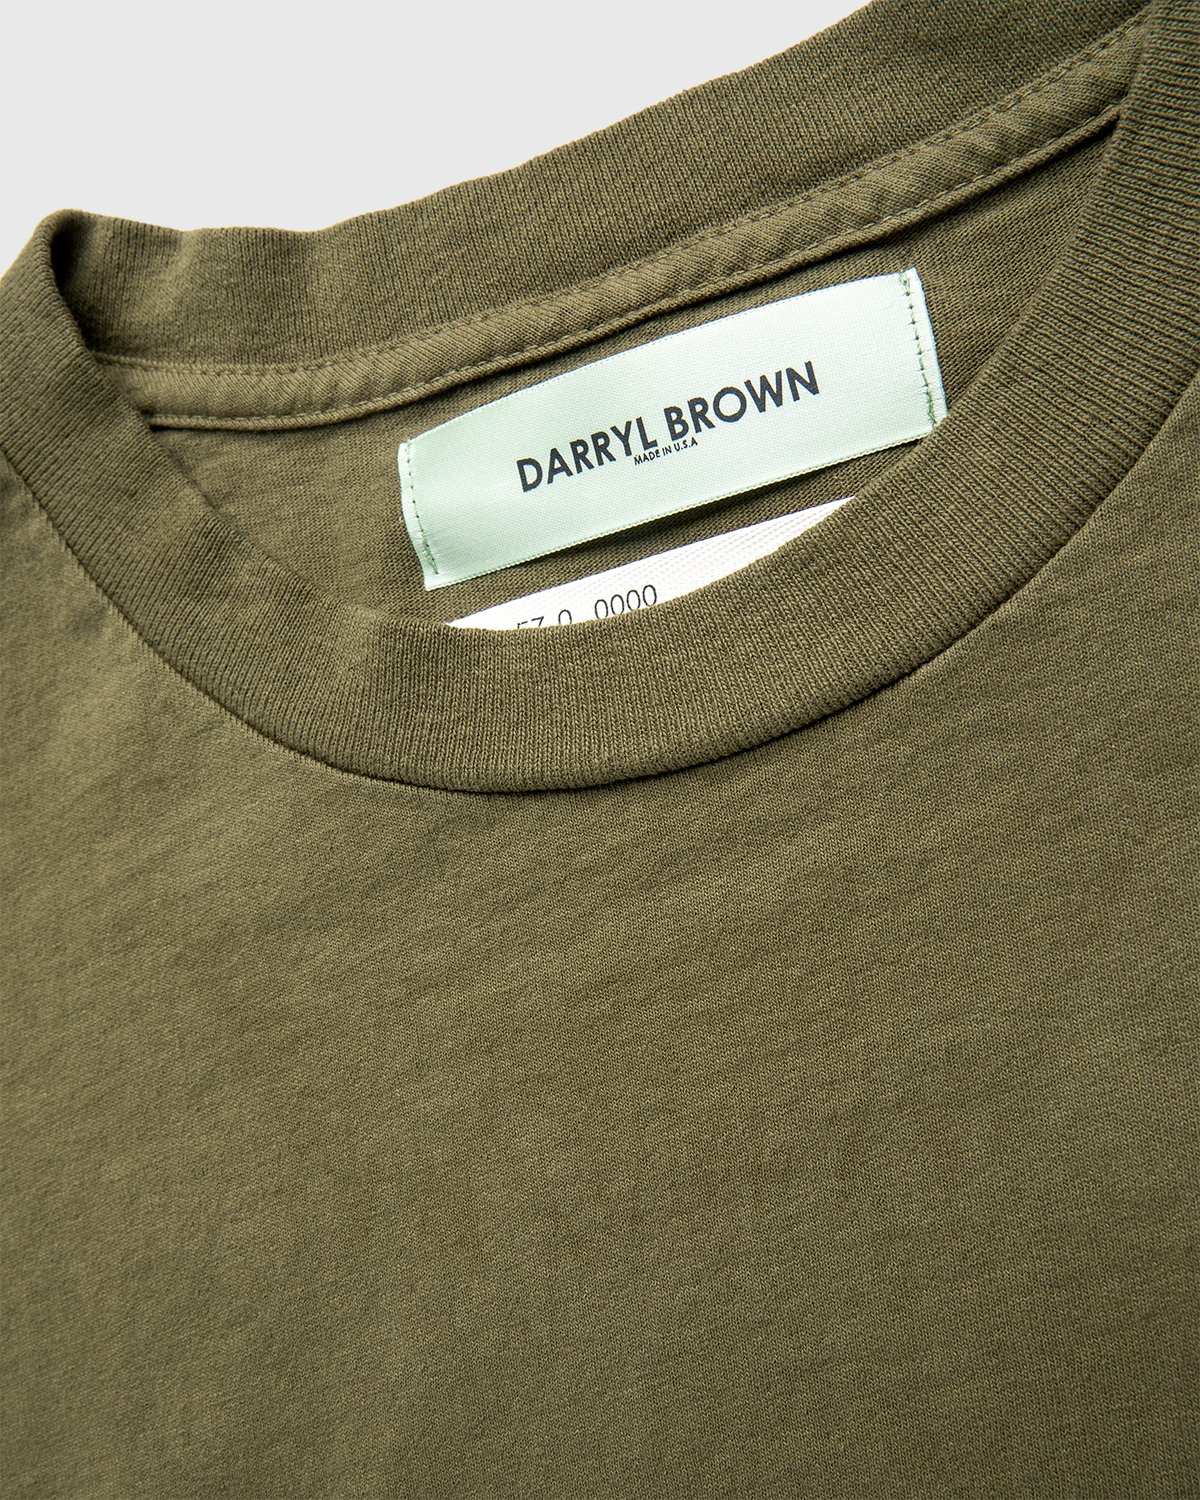 Darryl Brown - T-Shirt Military Olive - Clothing - Green - Image 3